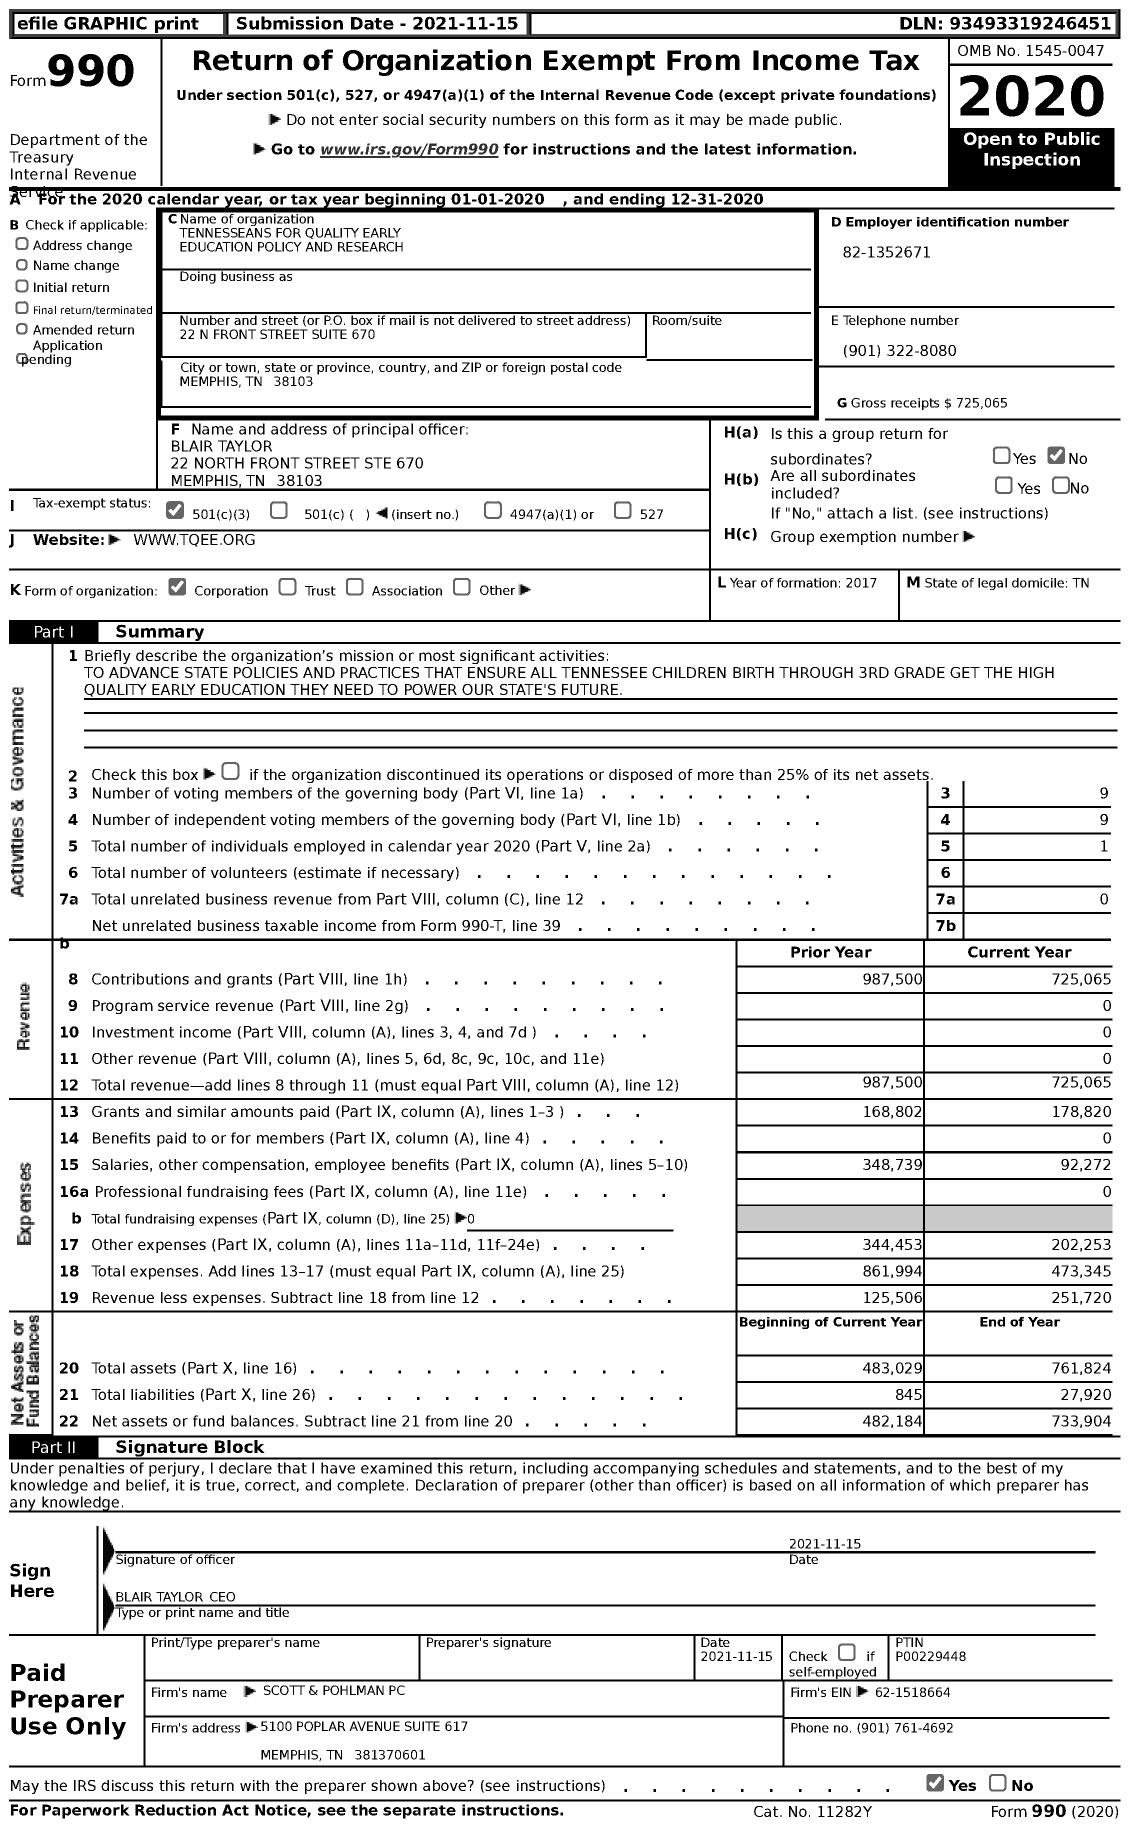 Image of first page of 2020 Form 990 for Tennesseans for Quality Early Education Policy and Research